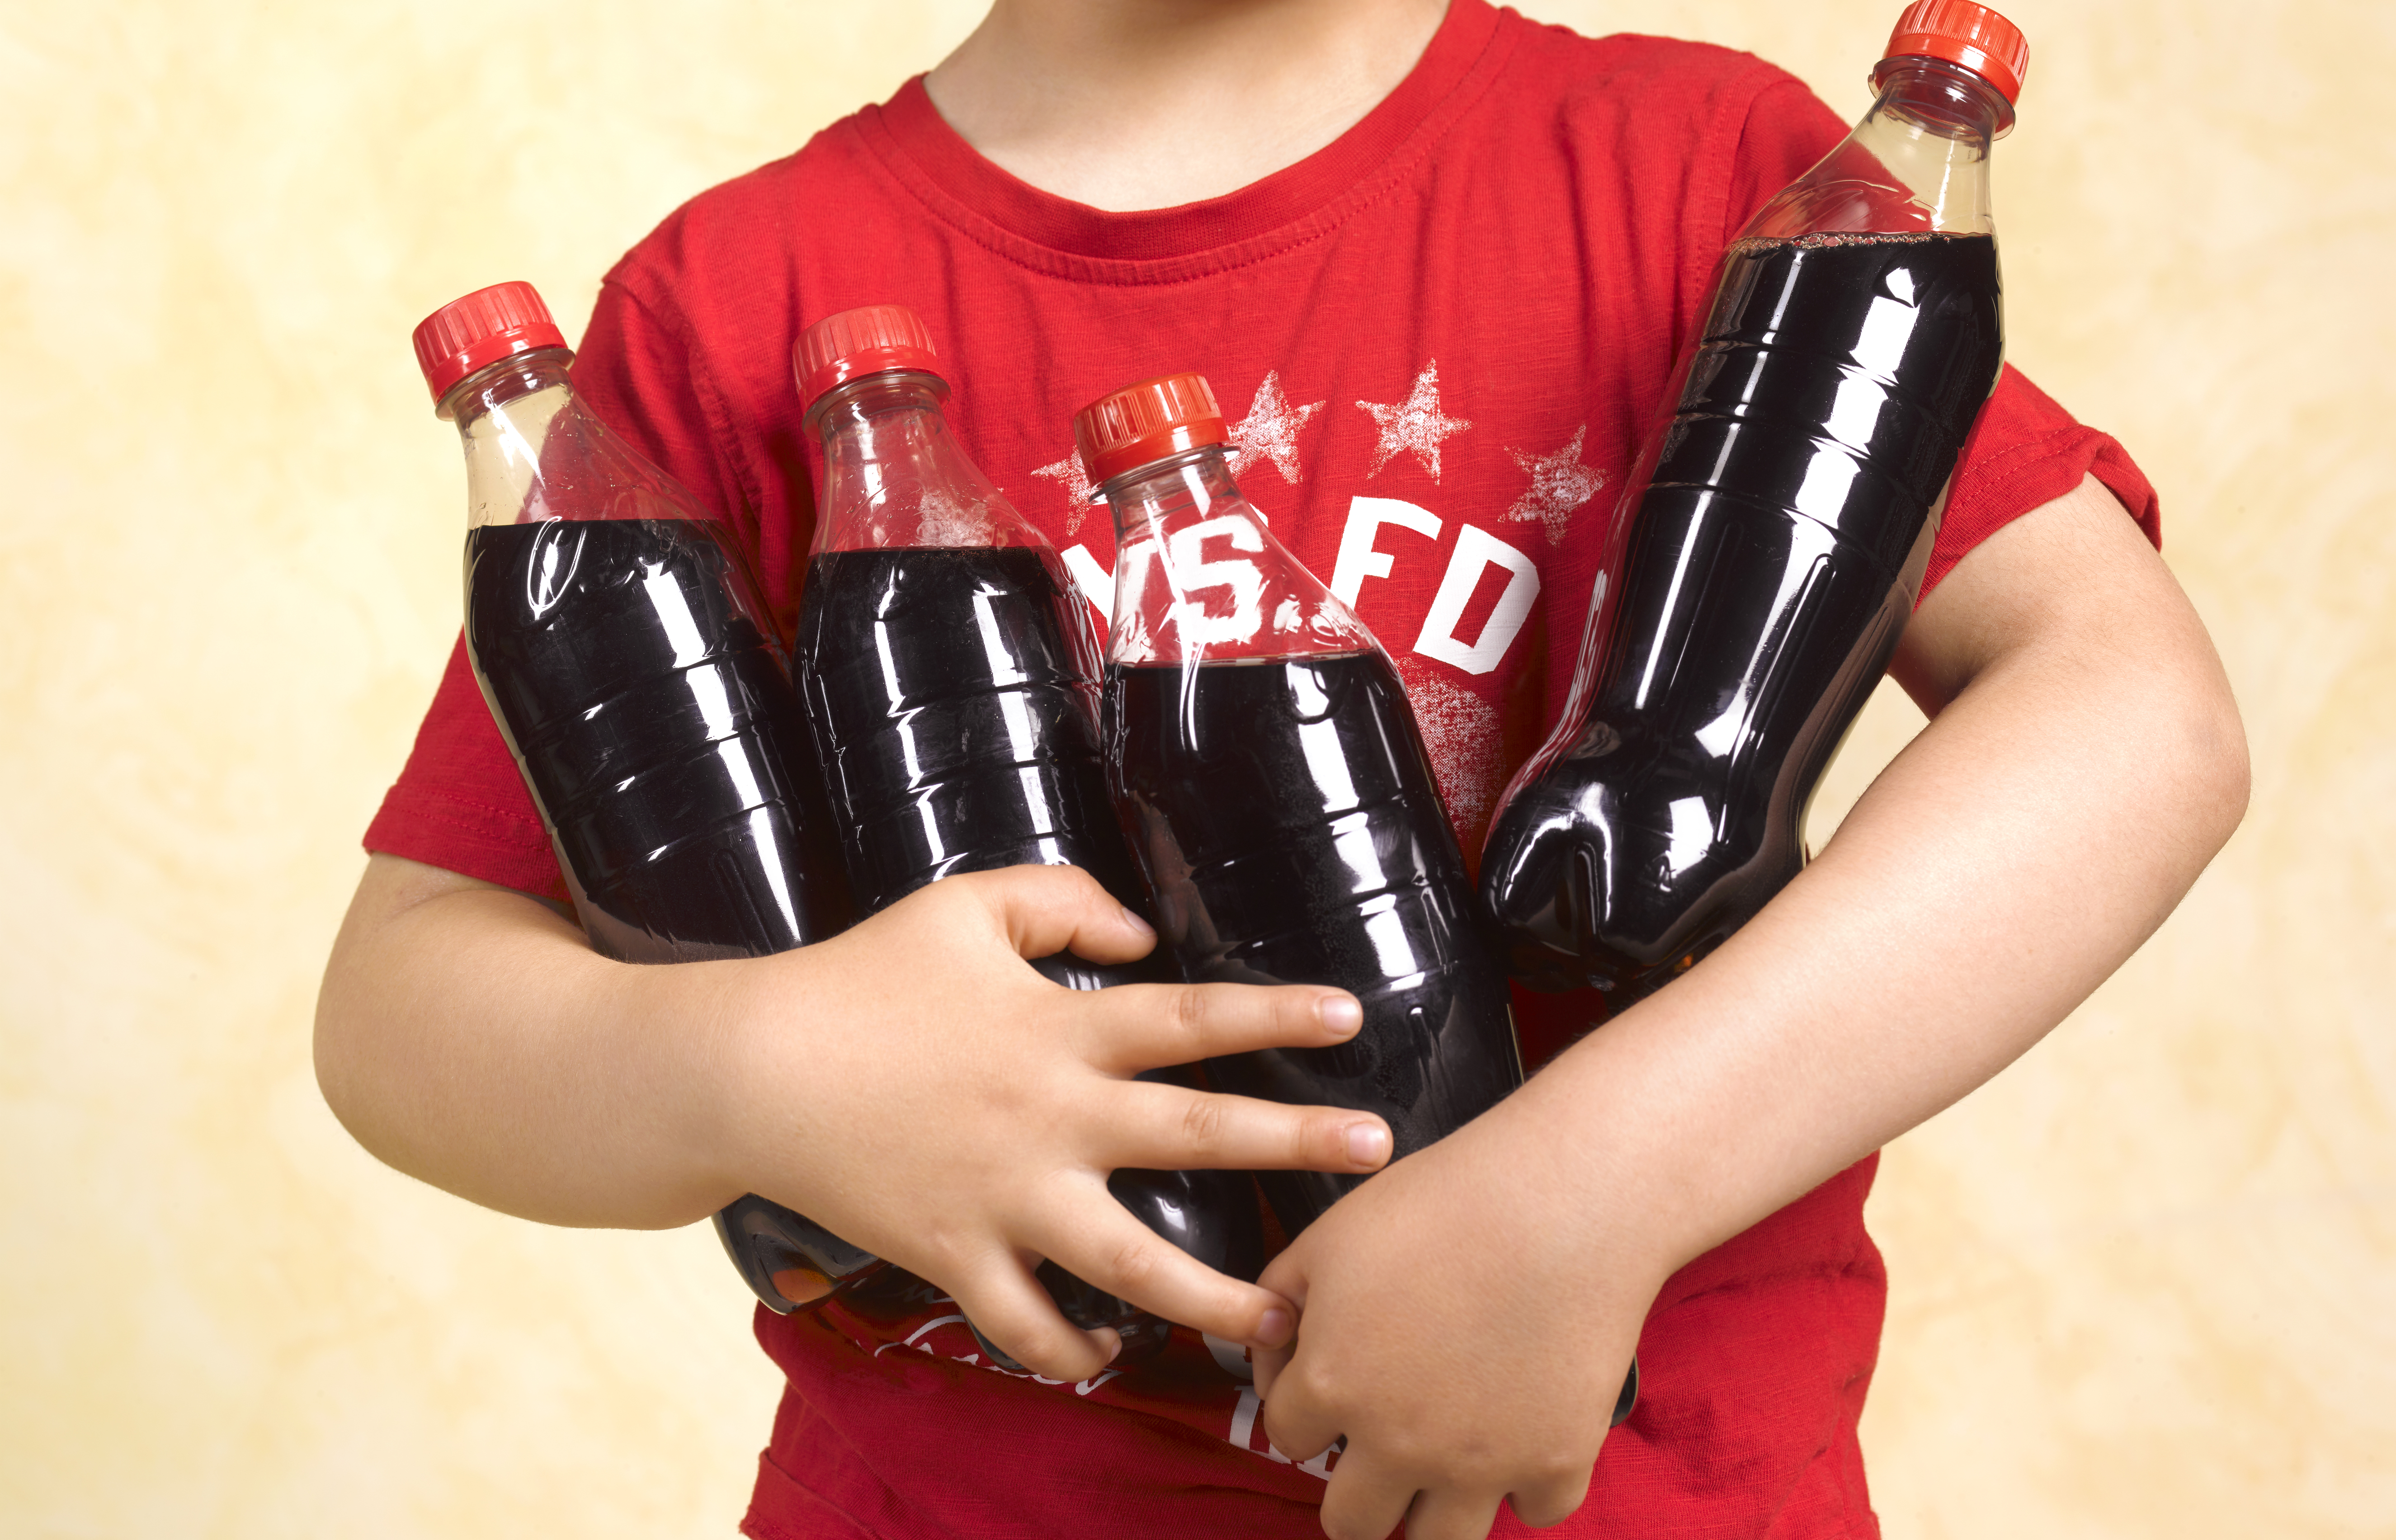 Research links kids' energy drink intake to health risks such as such as insulin resistance, as well as mental health issues